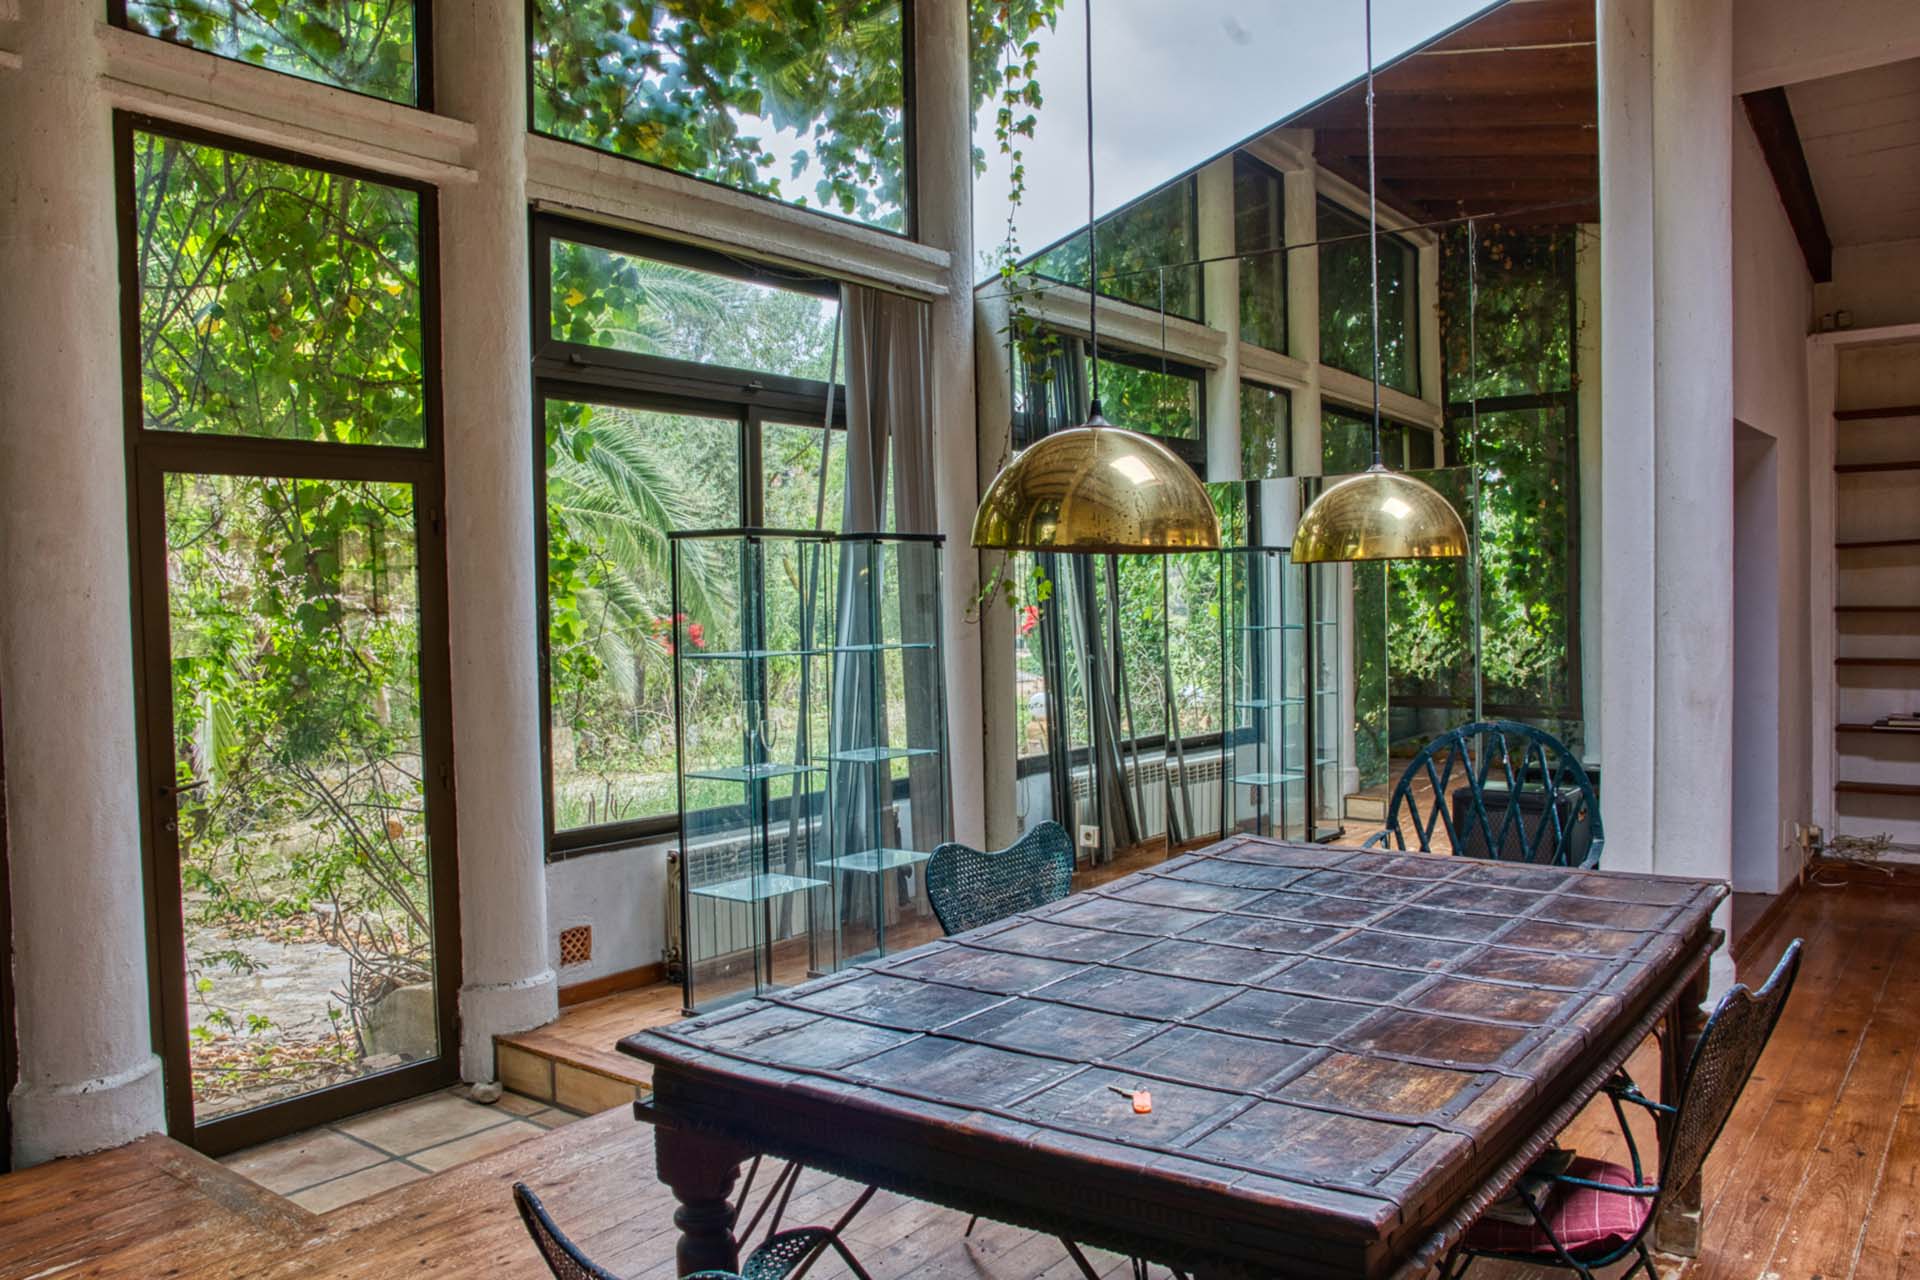 Dining area with large windows